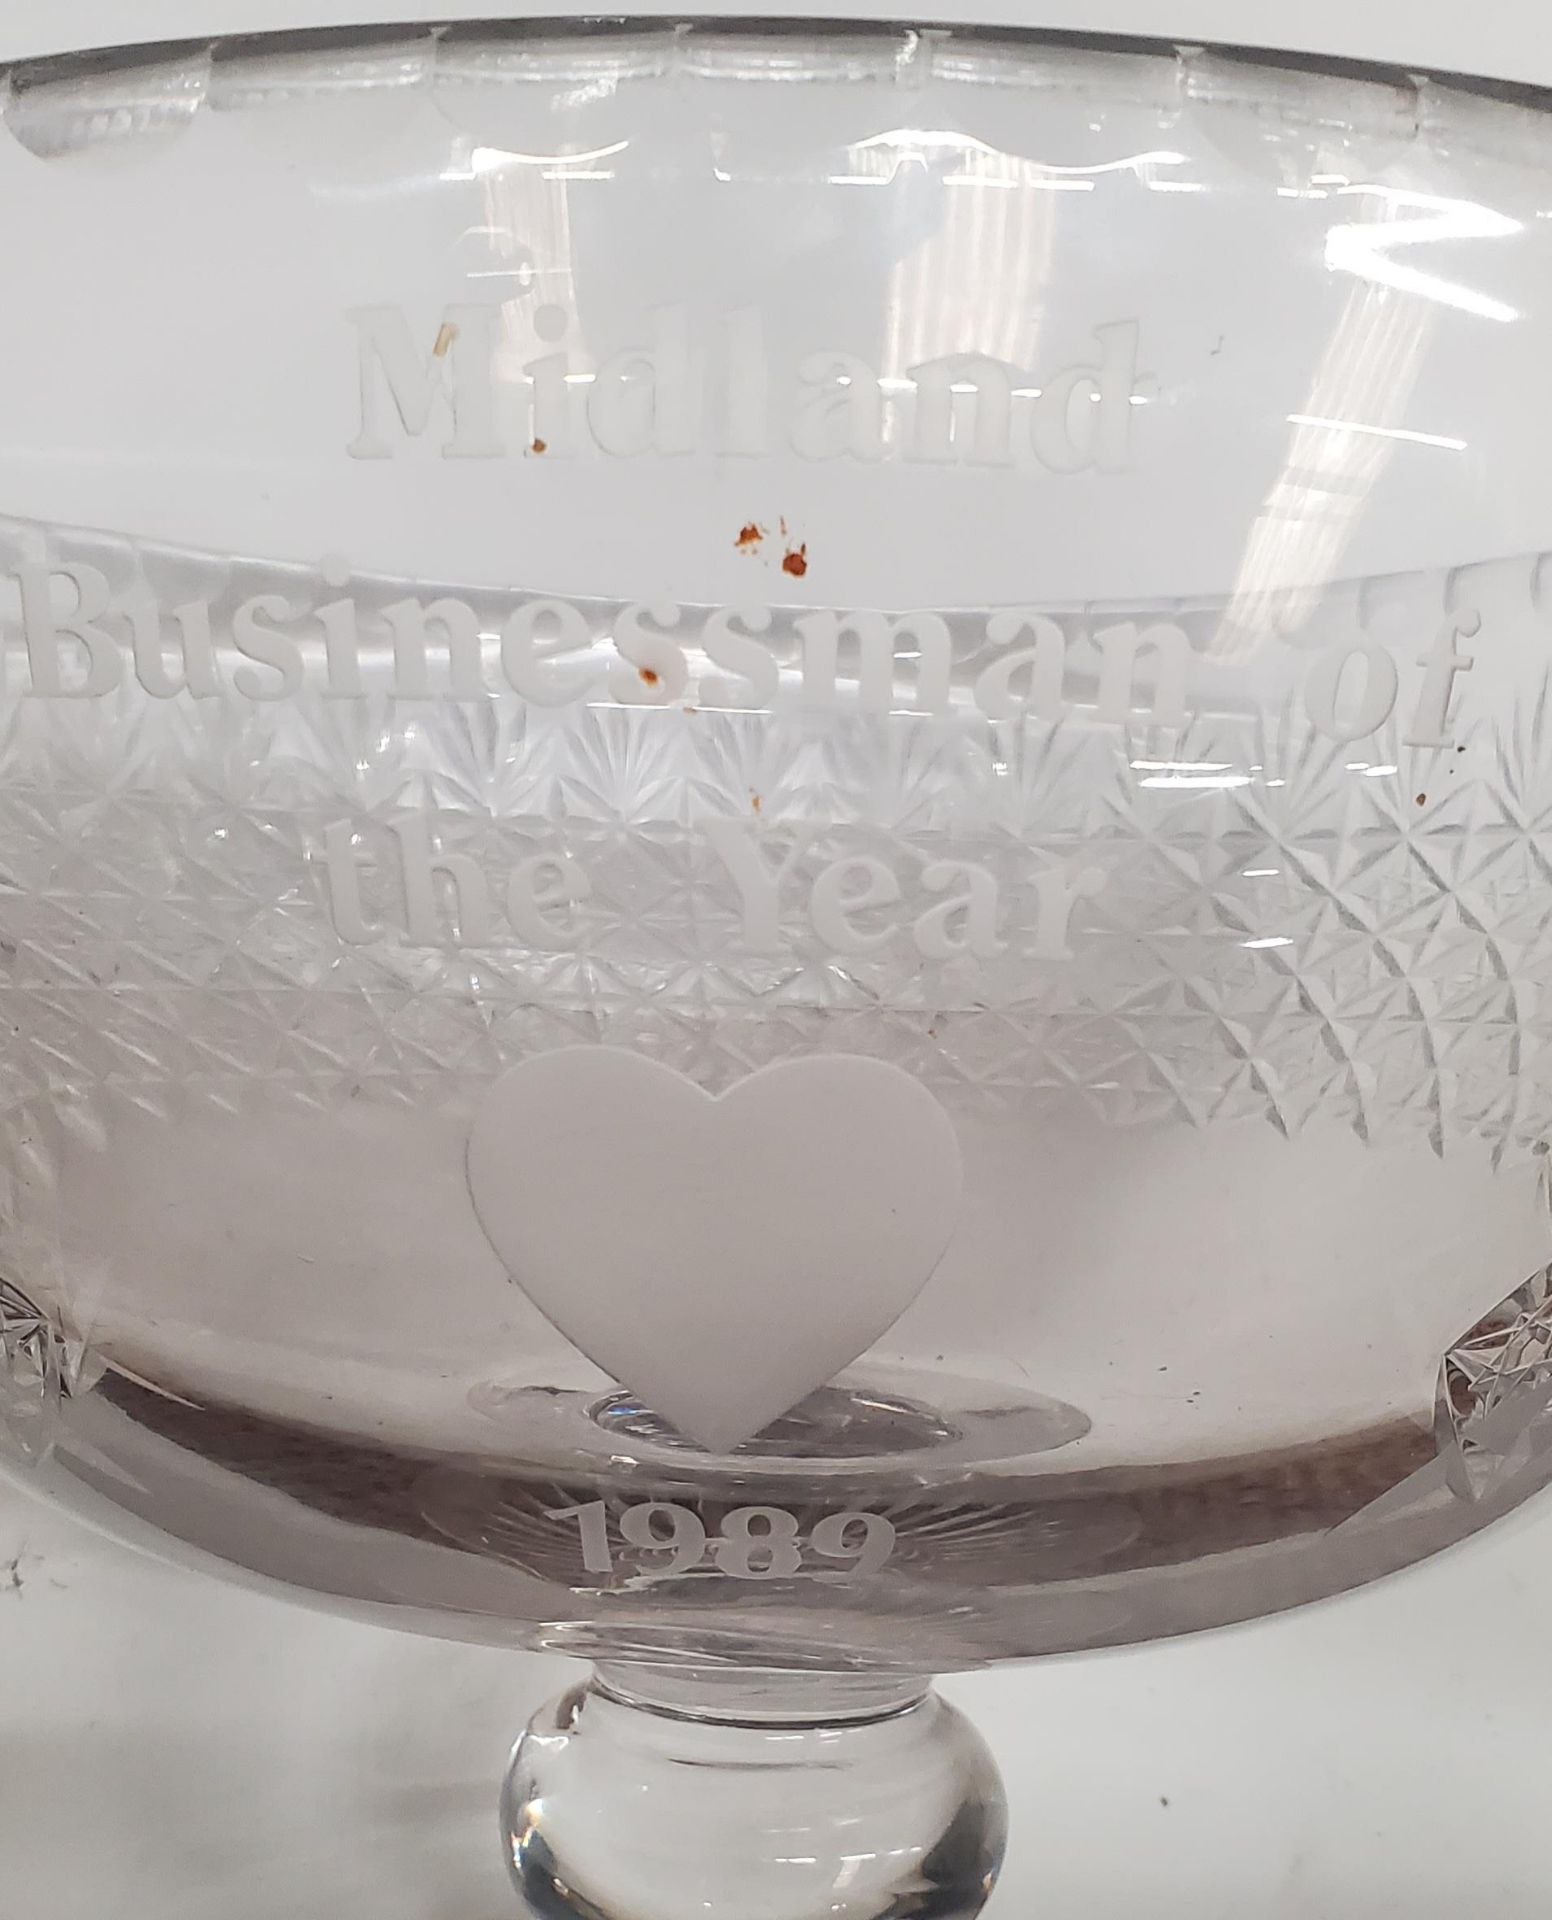 A VINTAGE CUT GLASS PEDESTAL BOWL - MIDLAND BUSINESS MAN OF THE YEAR 1989 - Image 2 of 2